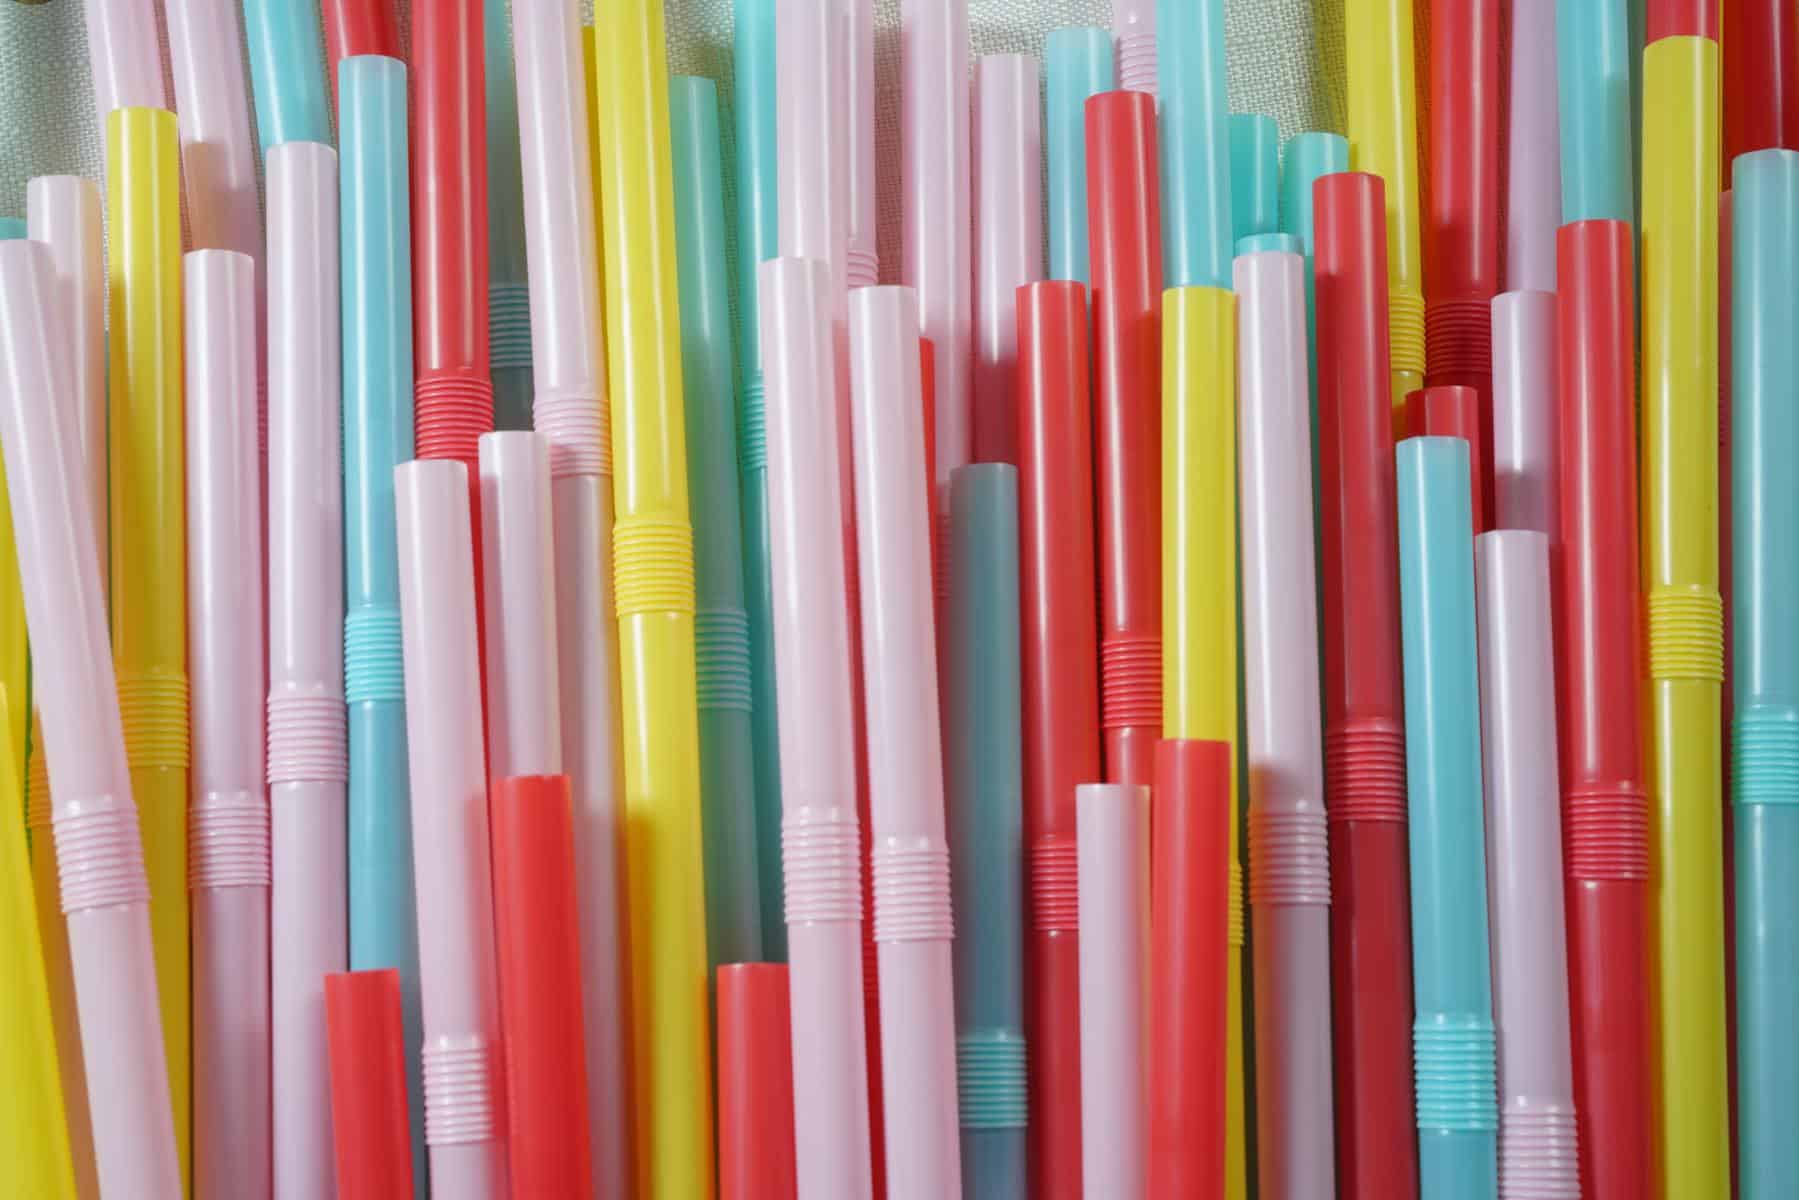 The last straw: In N.J., single-use plastic straws to be provided by food businesses upon request only starting Nov. 4